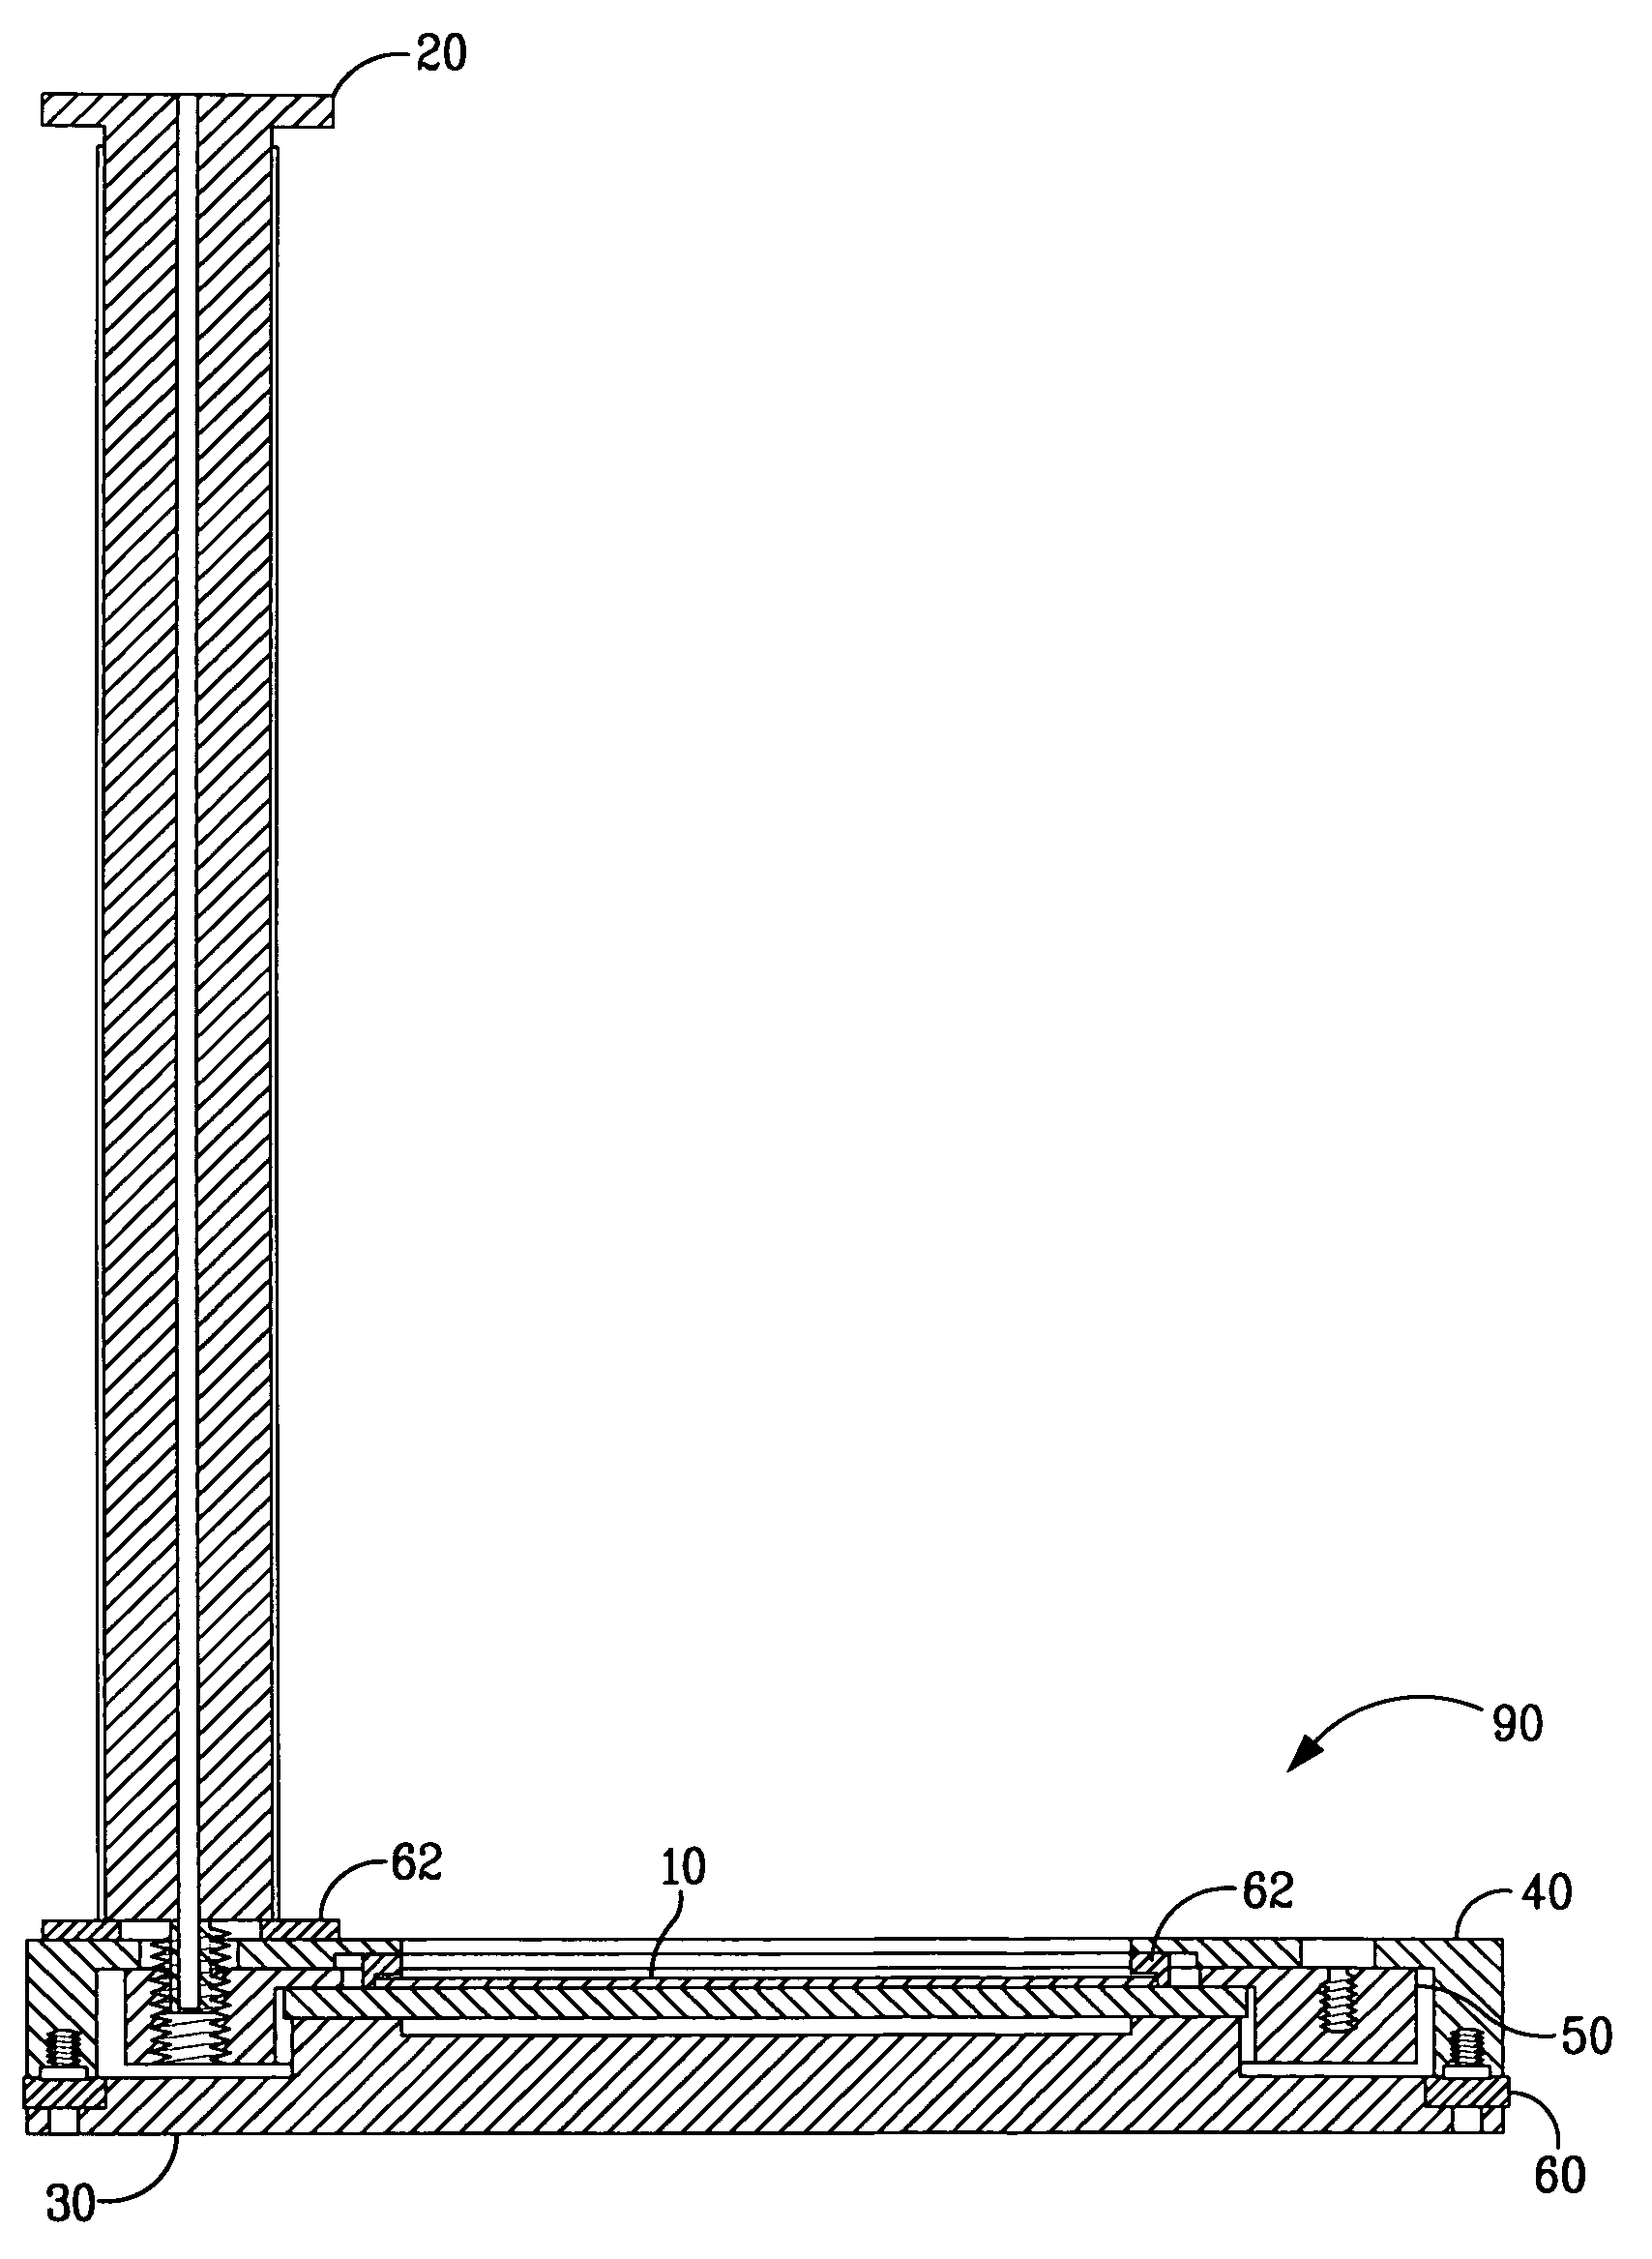 Apparatus and method for electroforming high aspect ratio micro-parts